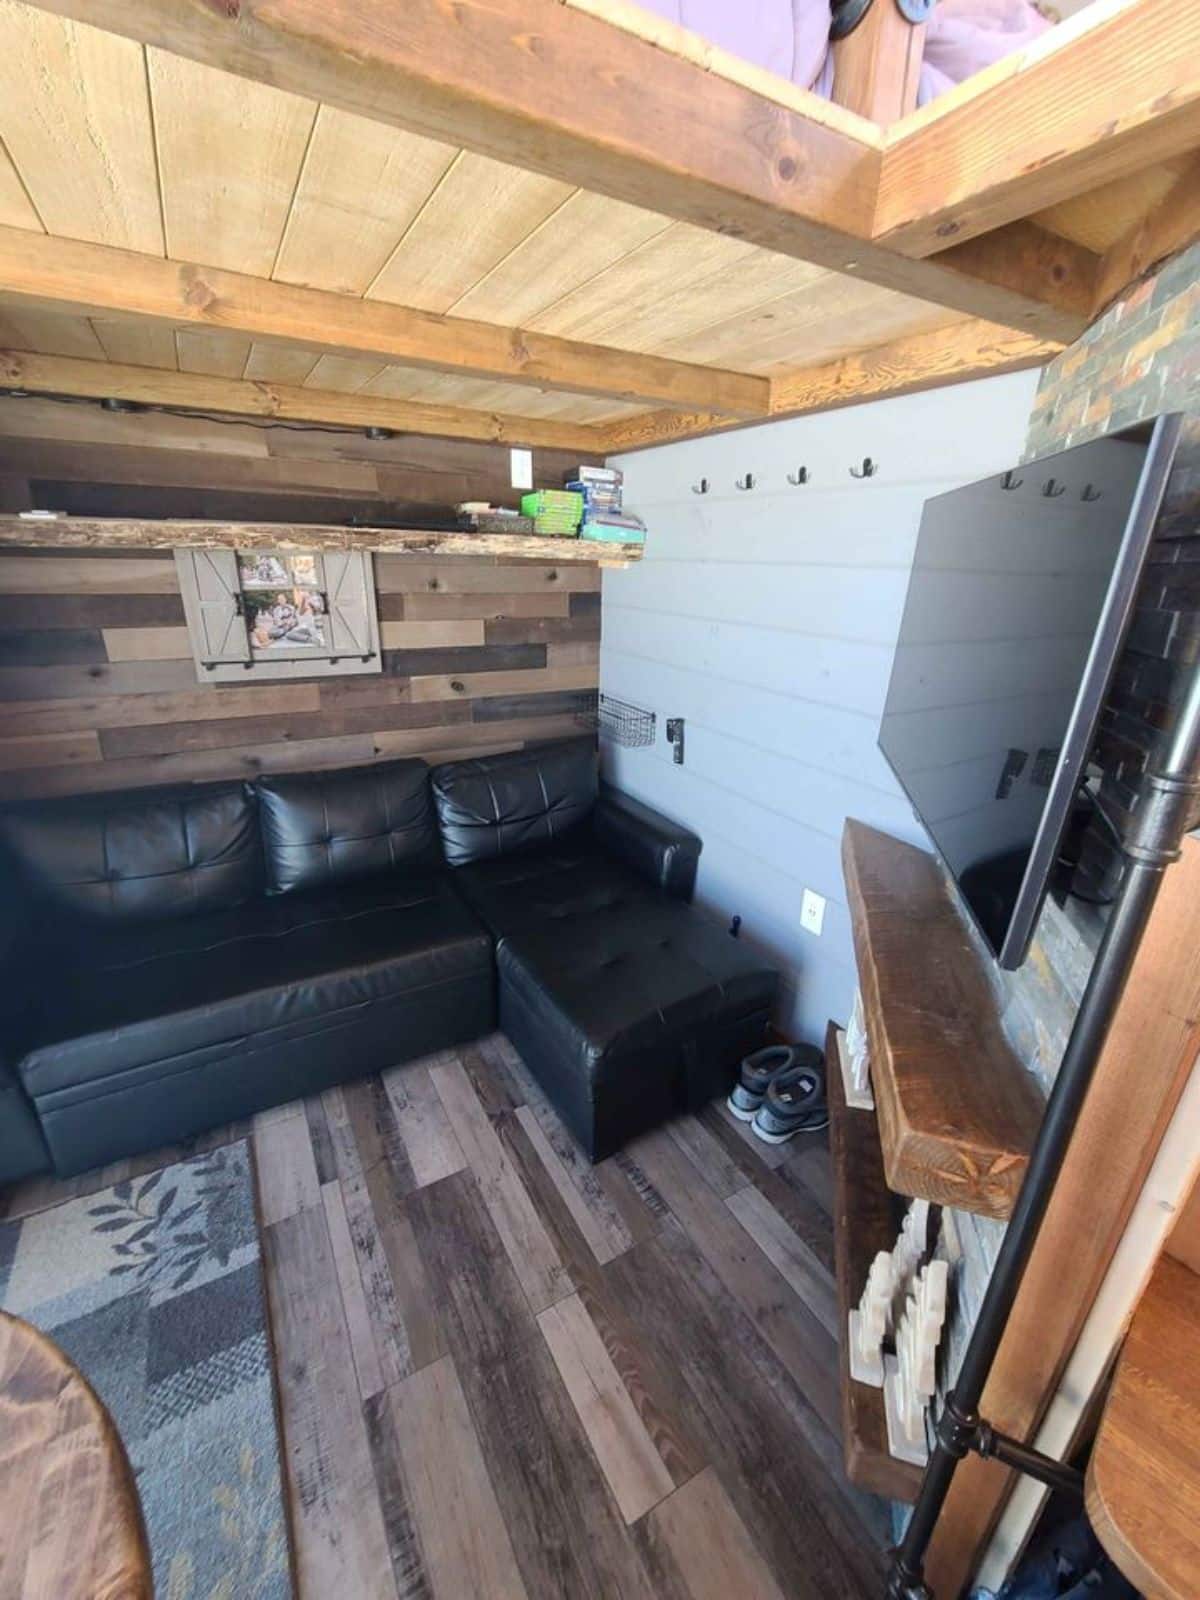 Living area of 21' Display Model Tiny Home has L shaped couch and wall mounted TV set